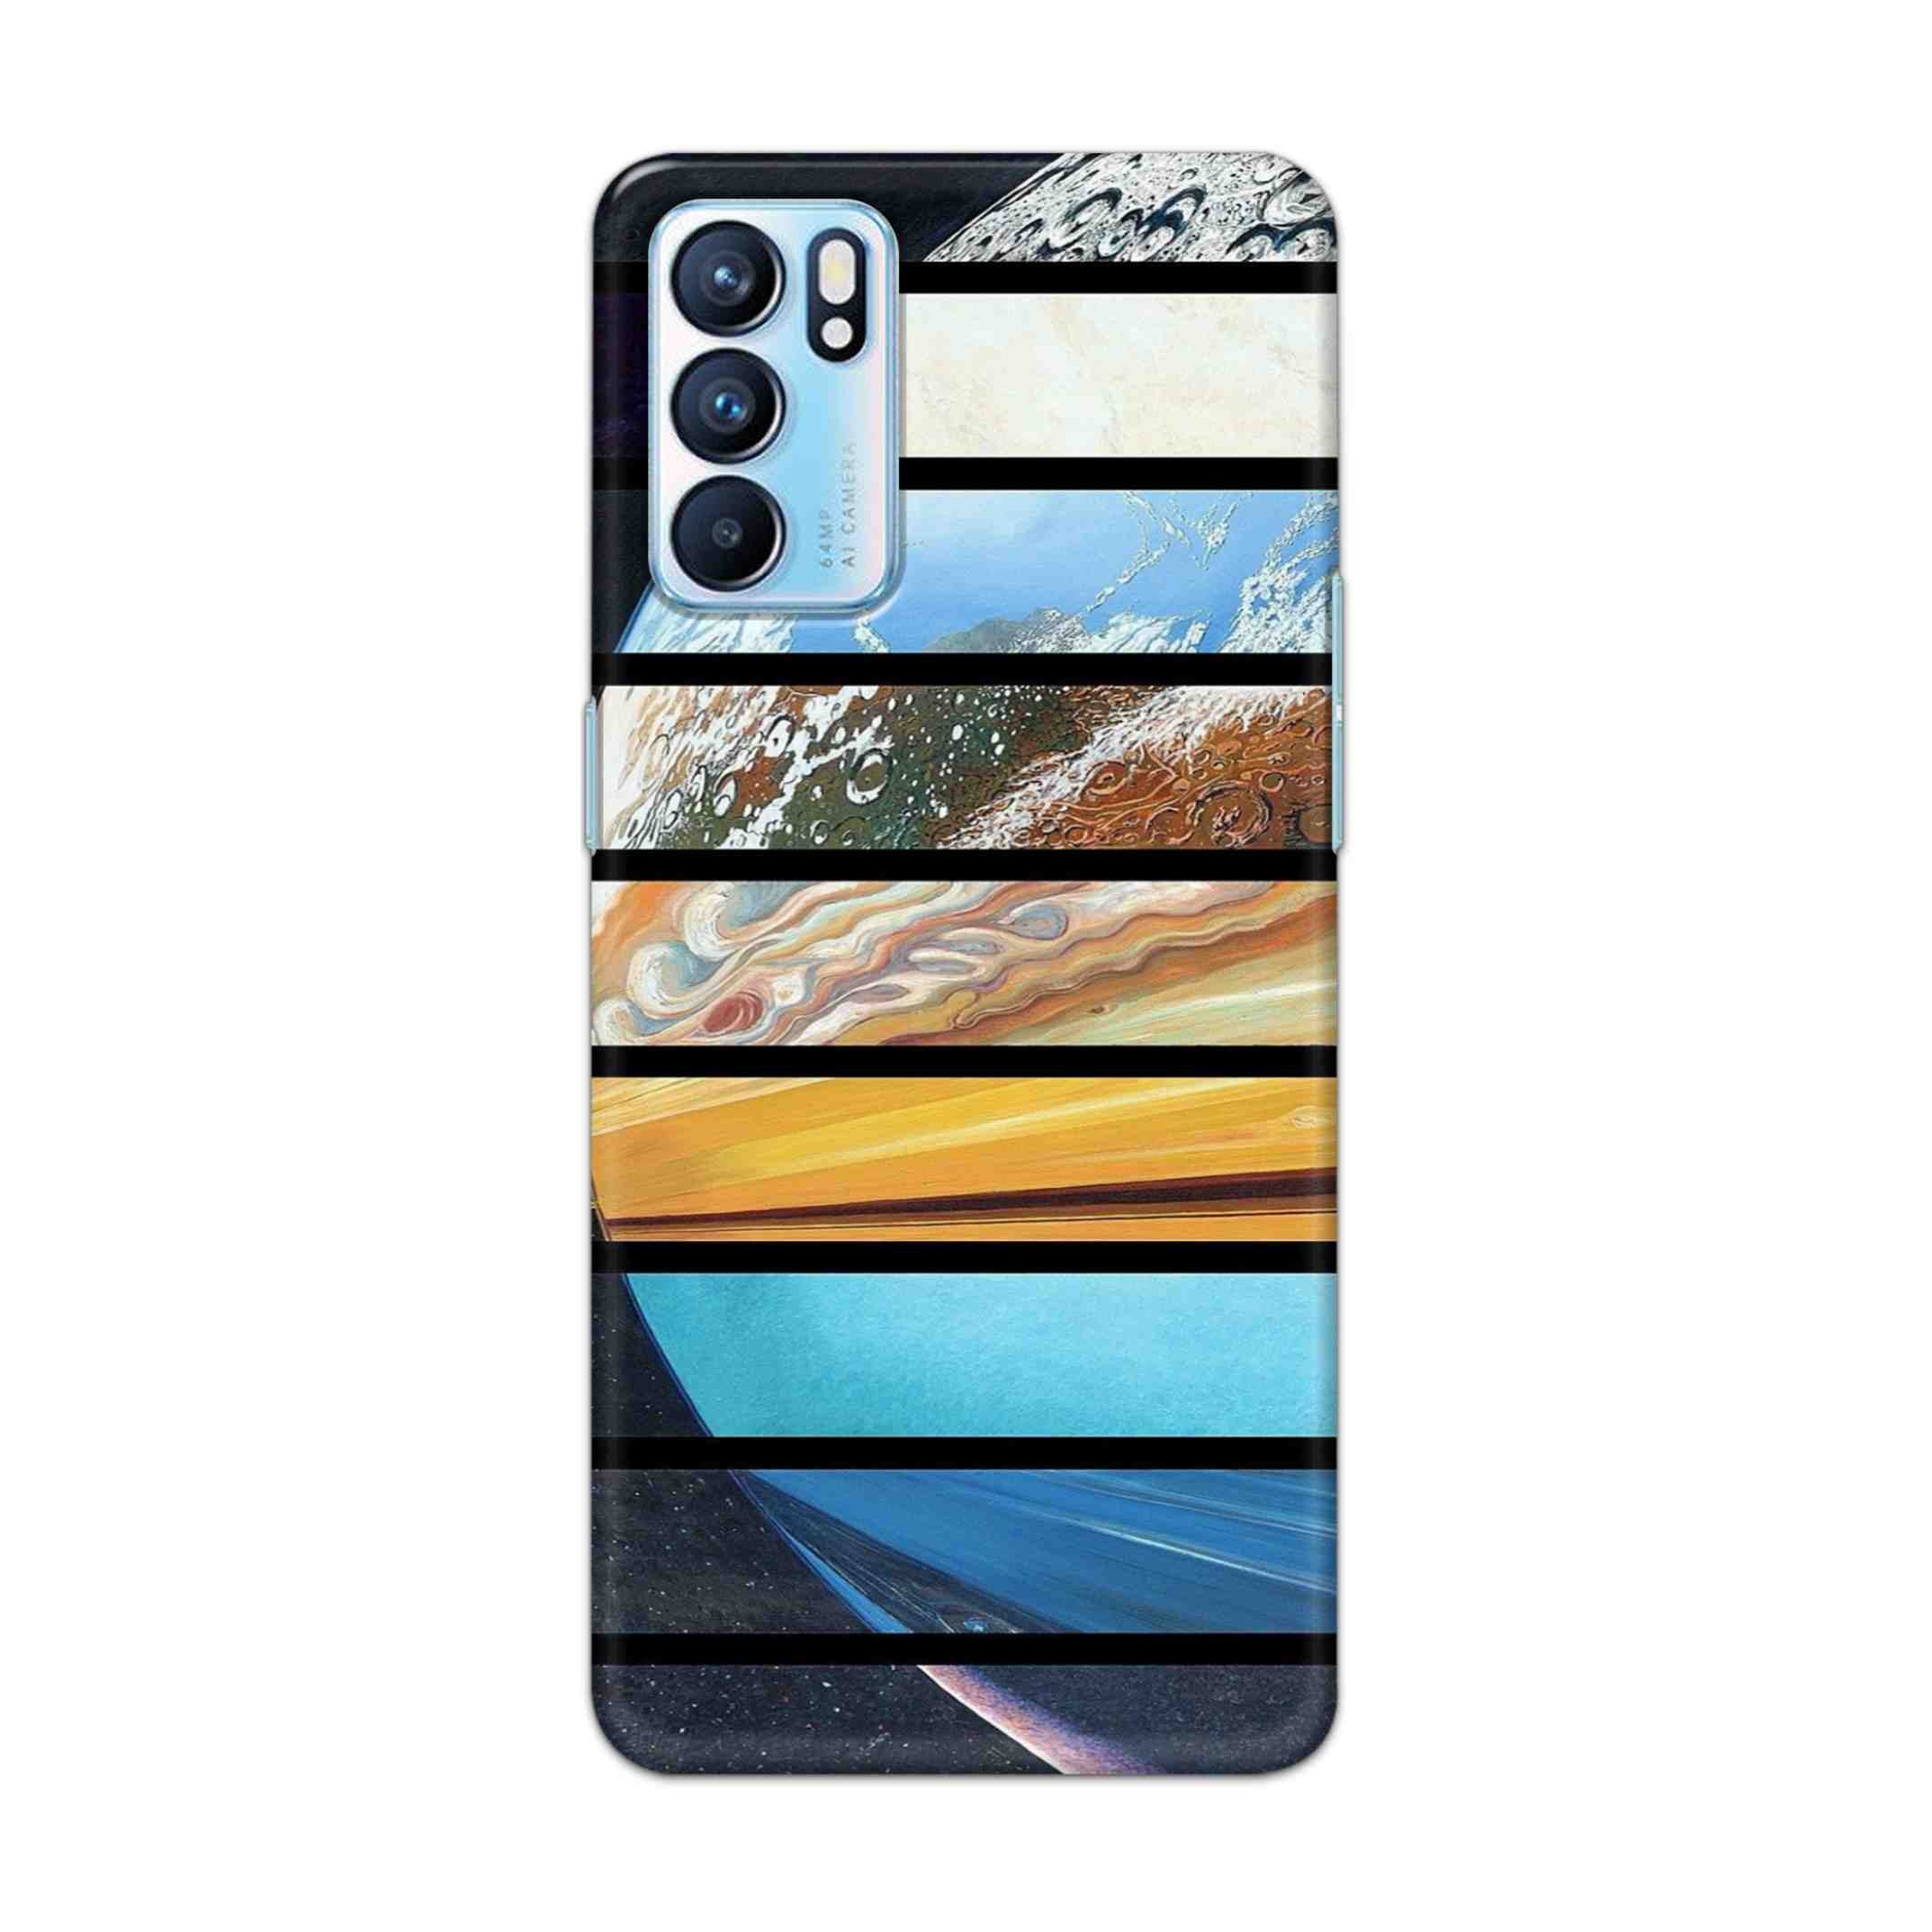 Buy Colourful Earth Hard Back Mobile Phone Case Cover For OPPO RENO 6 5G Online